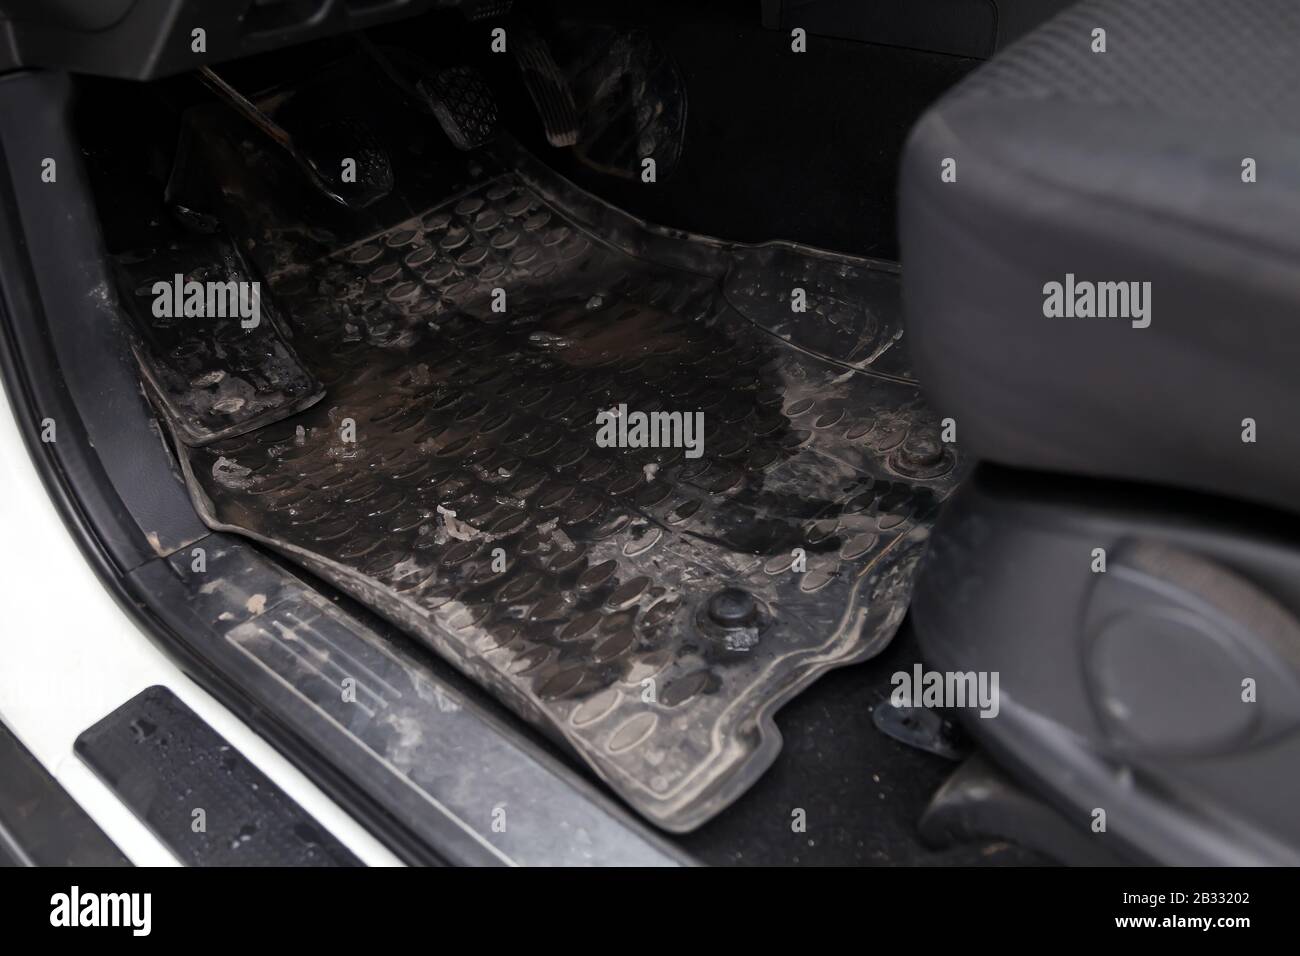 Dirty car floor mats of black rubber with gas pedals and brakes in